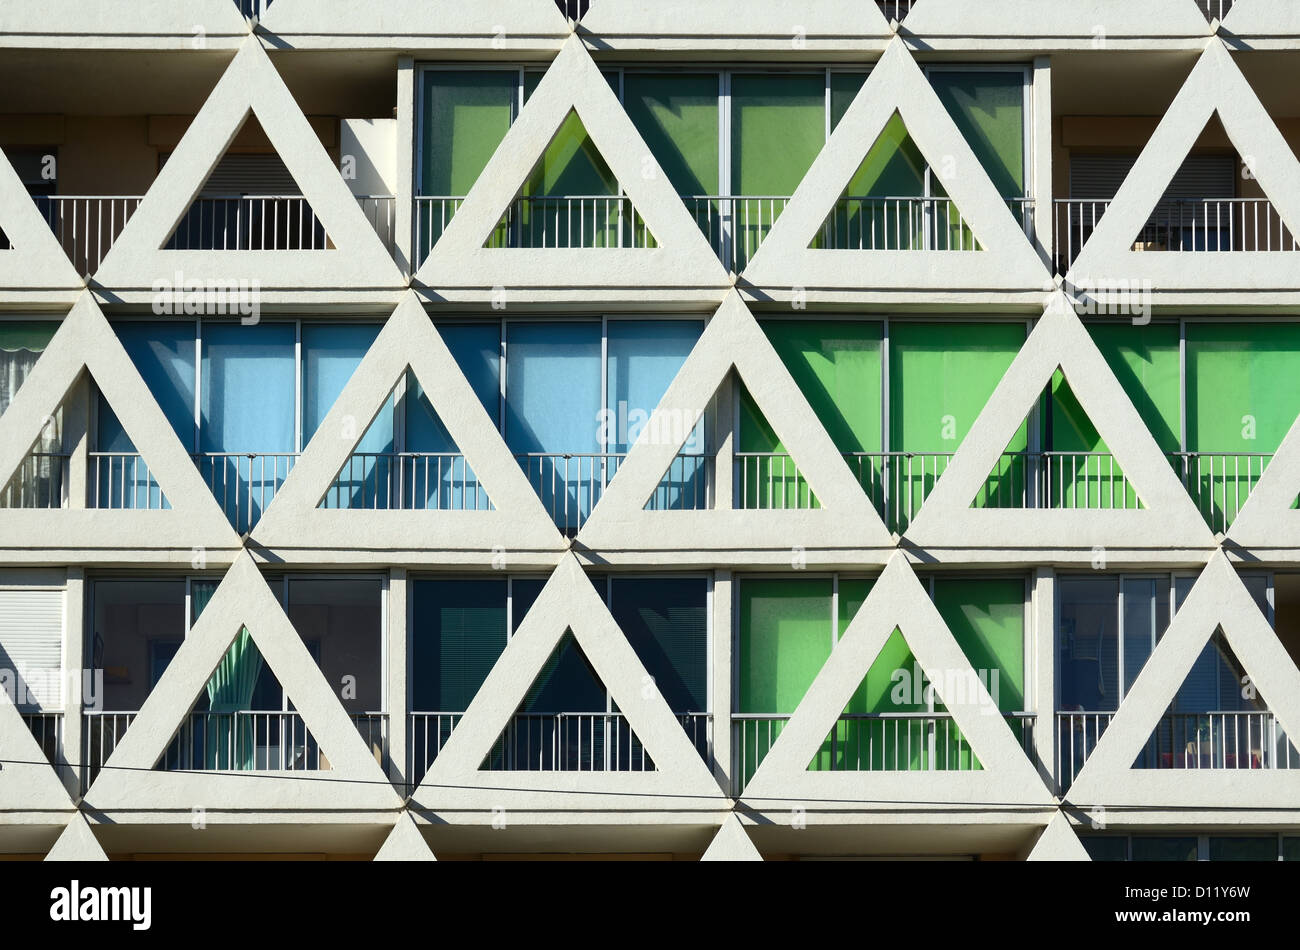 Triangular Facade Les Voiles Blanches Holiday Apartments, Modern Architecture in Resort Town of La Grande-Motte Hérault France Stock Photo